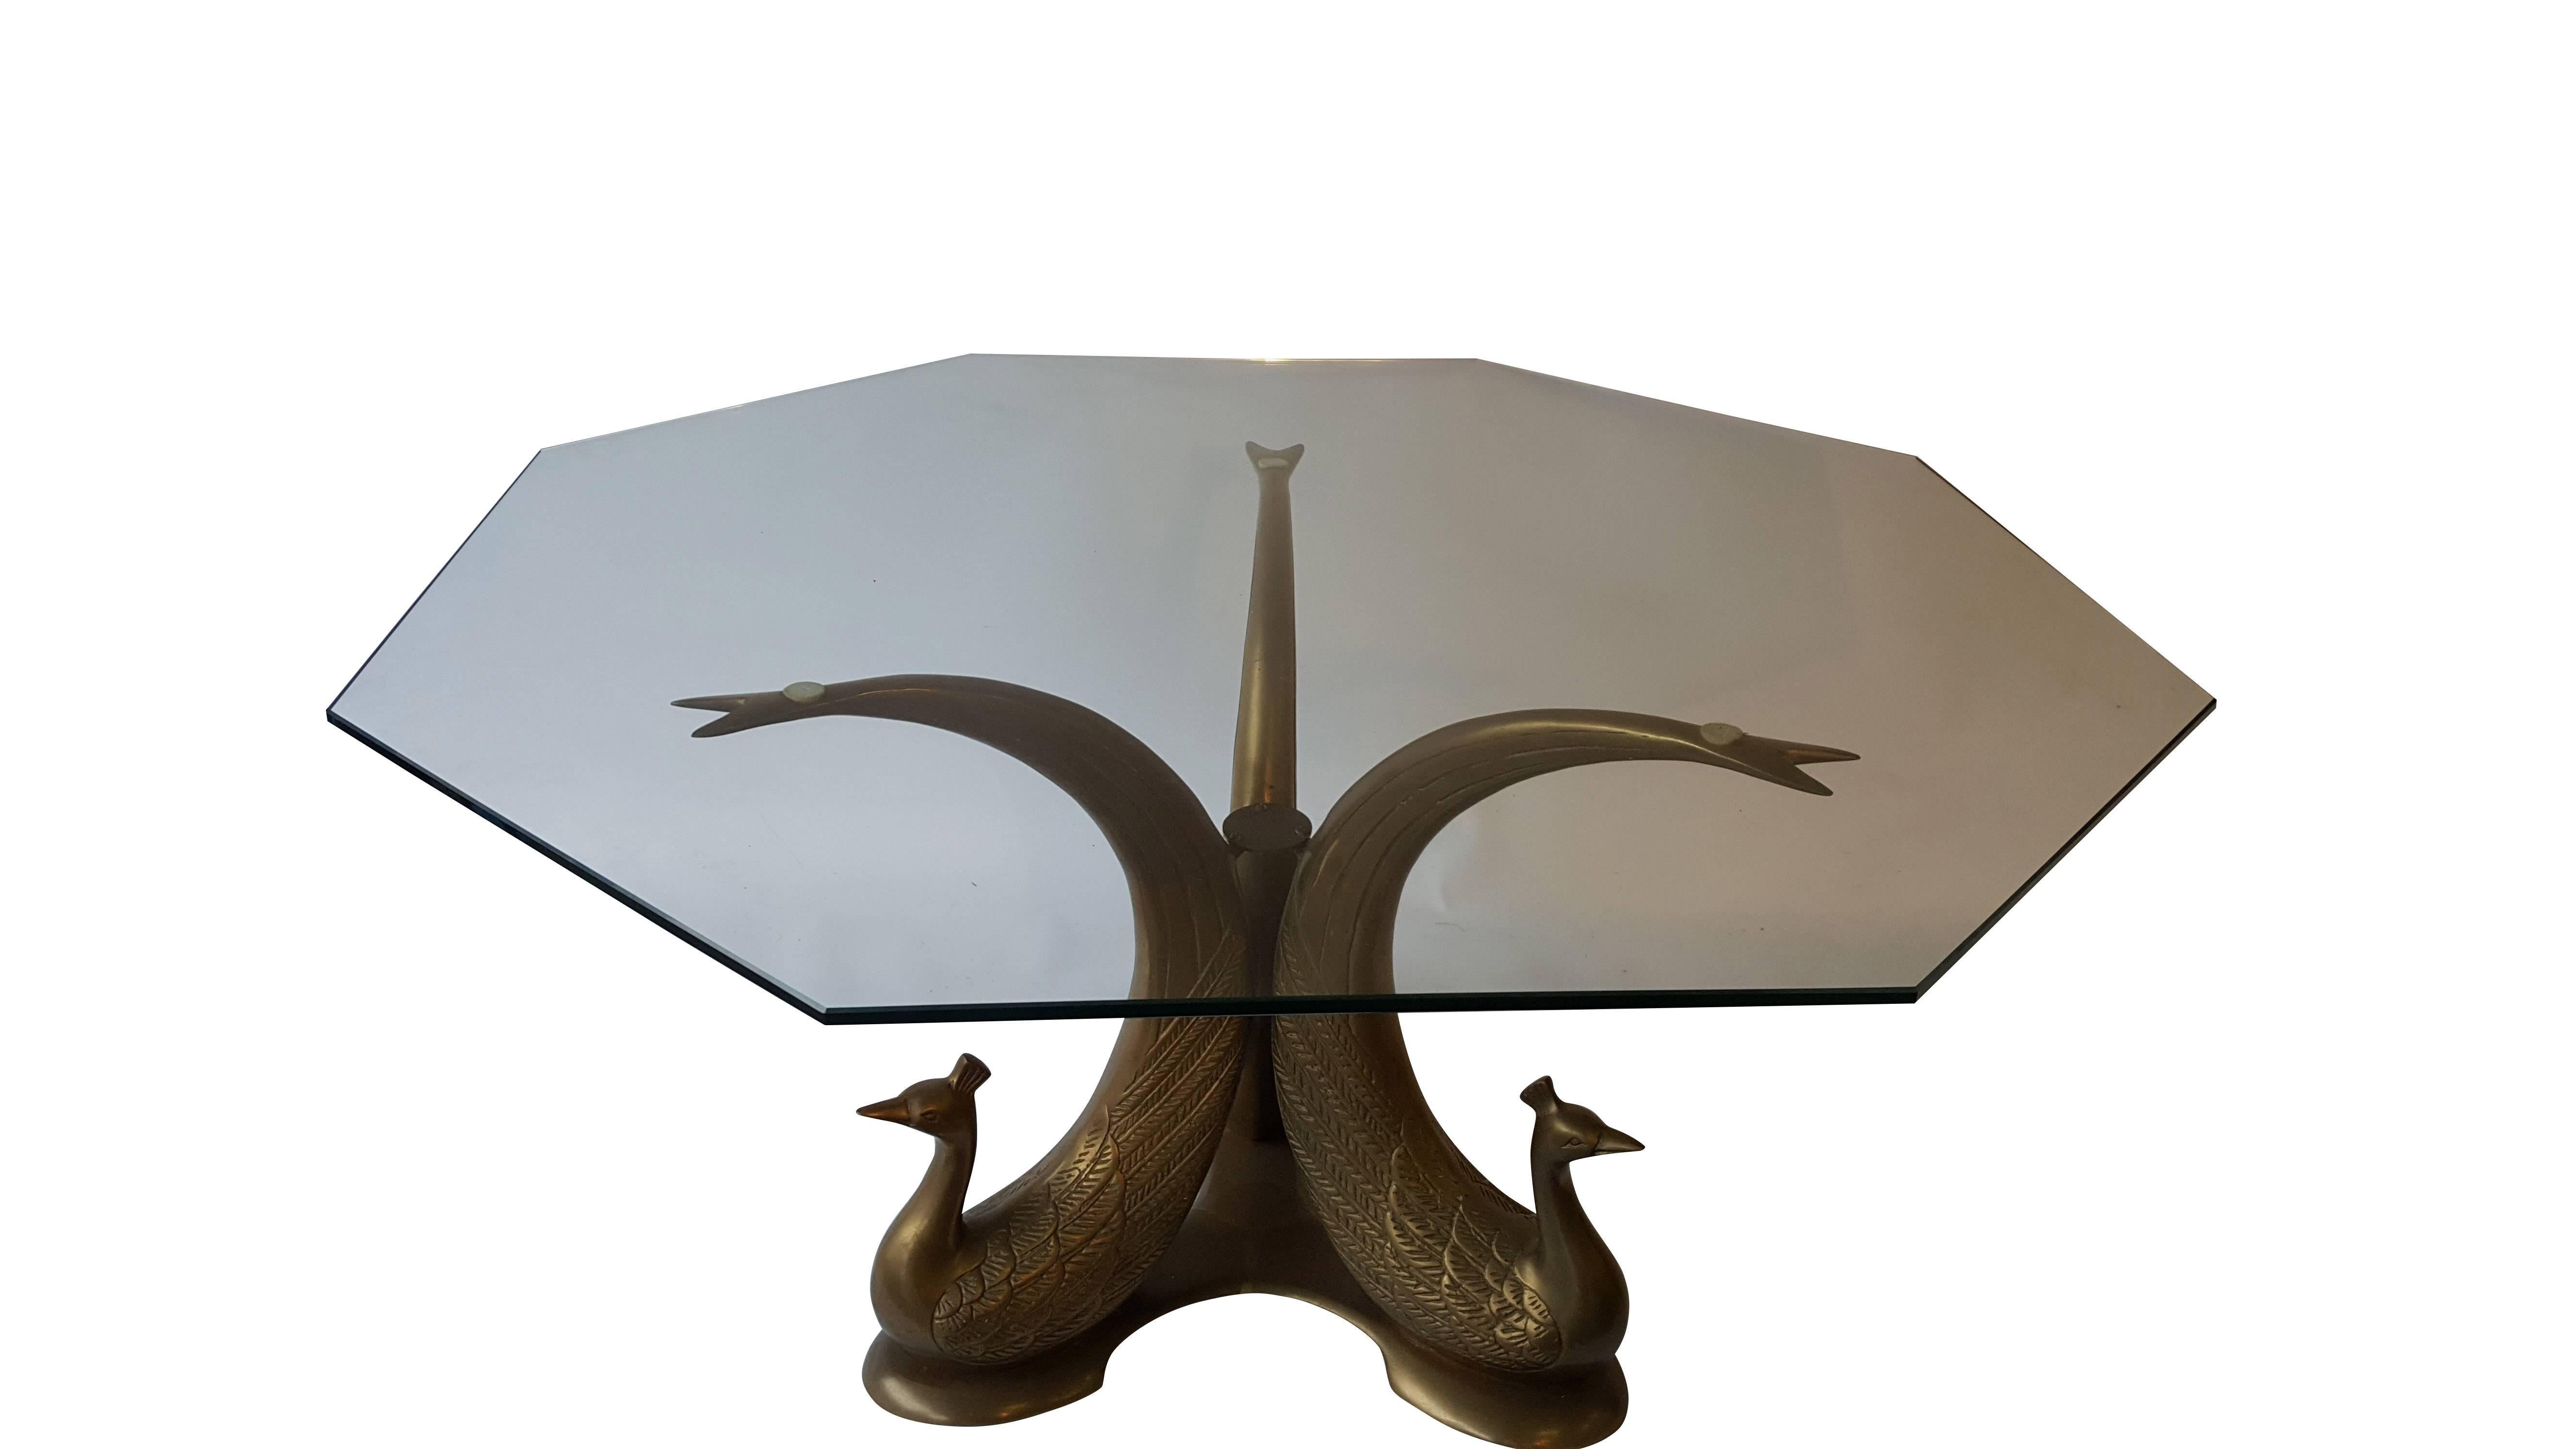 A very elegant Hollywood Regency coffee table!
Beautifully detailed ornate base brass, this table features three brass peacocks as the base.
The top is a separate and very heavy solid piece of round glass.
This piece is very heavy, sturdy, great